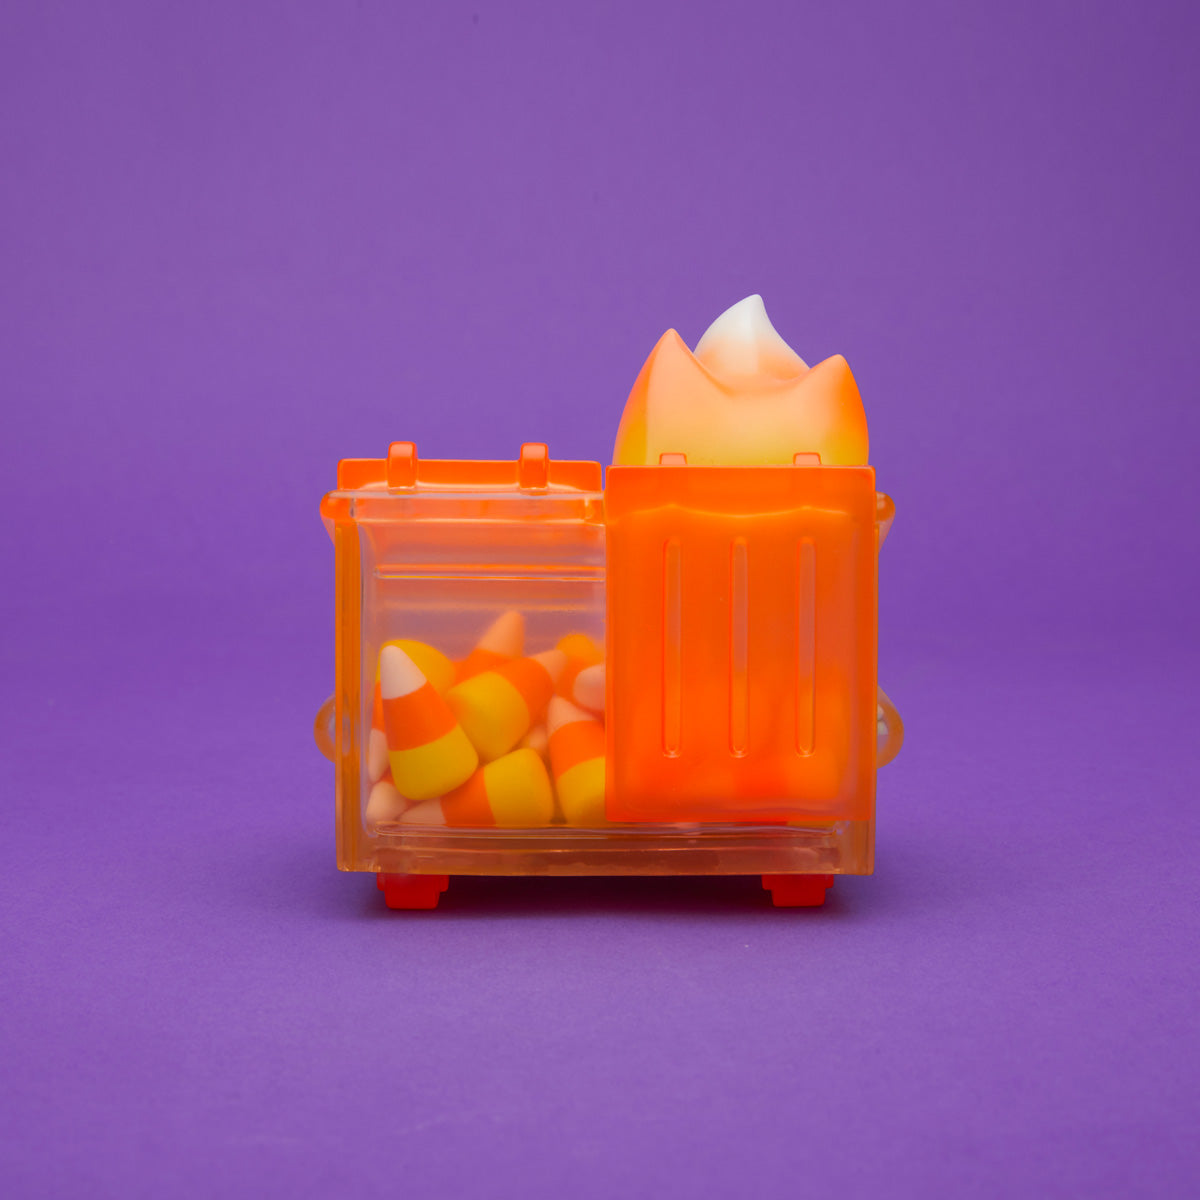 Orange translucent Dumpster Fire filled with candy corn and a yellow, orange, and white flame from the back.